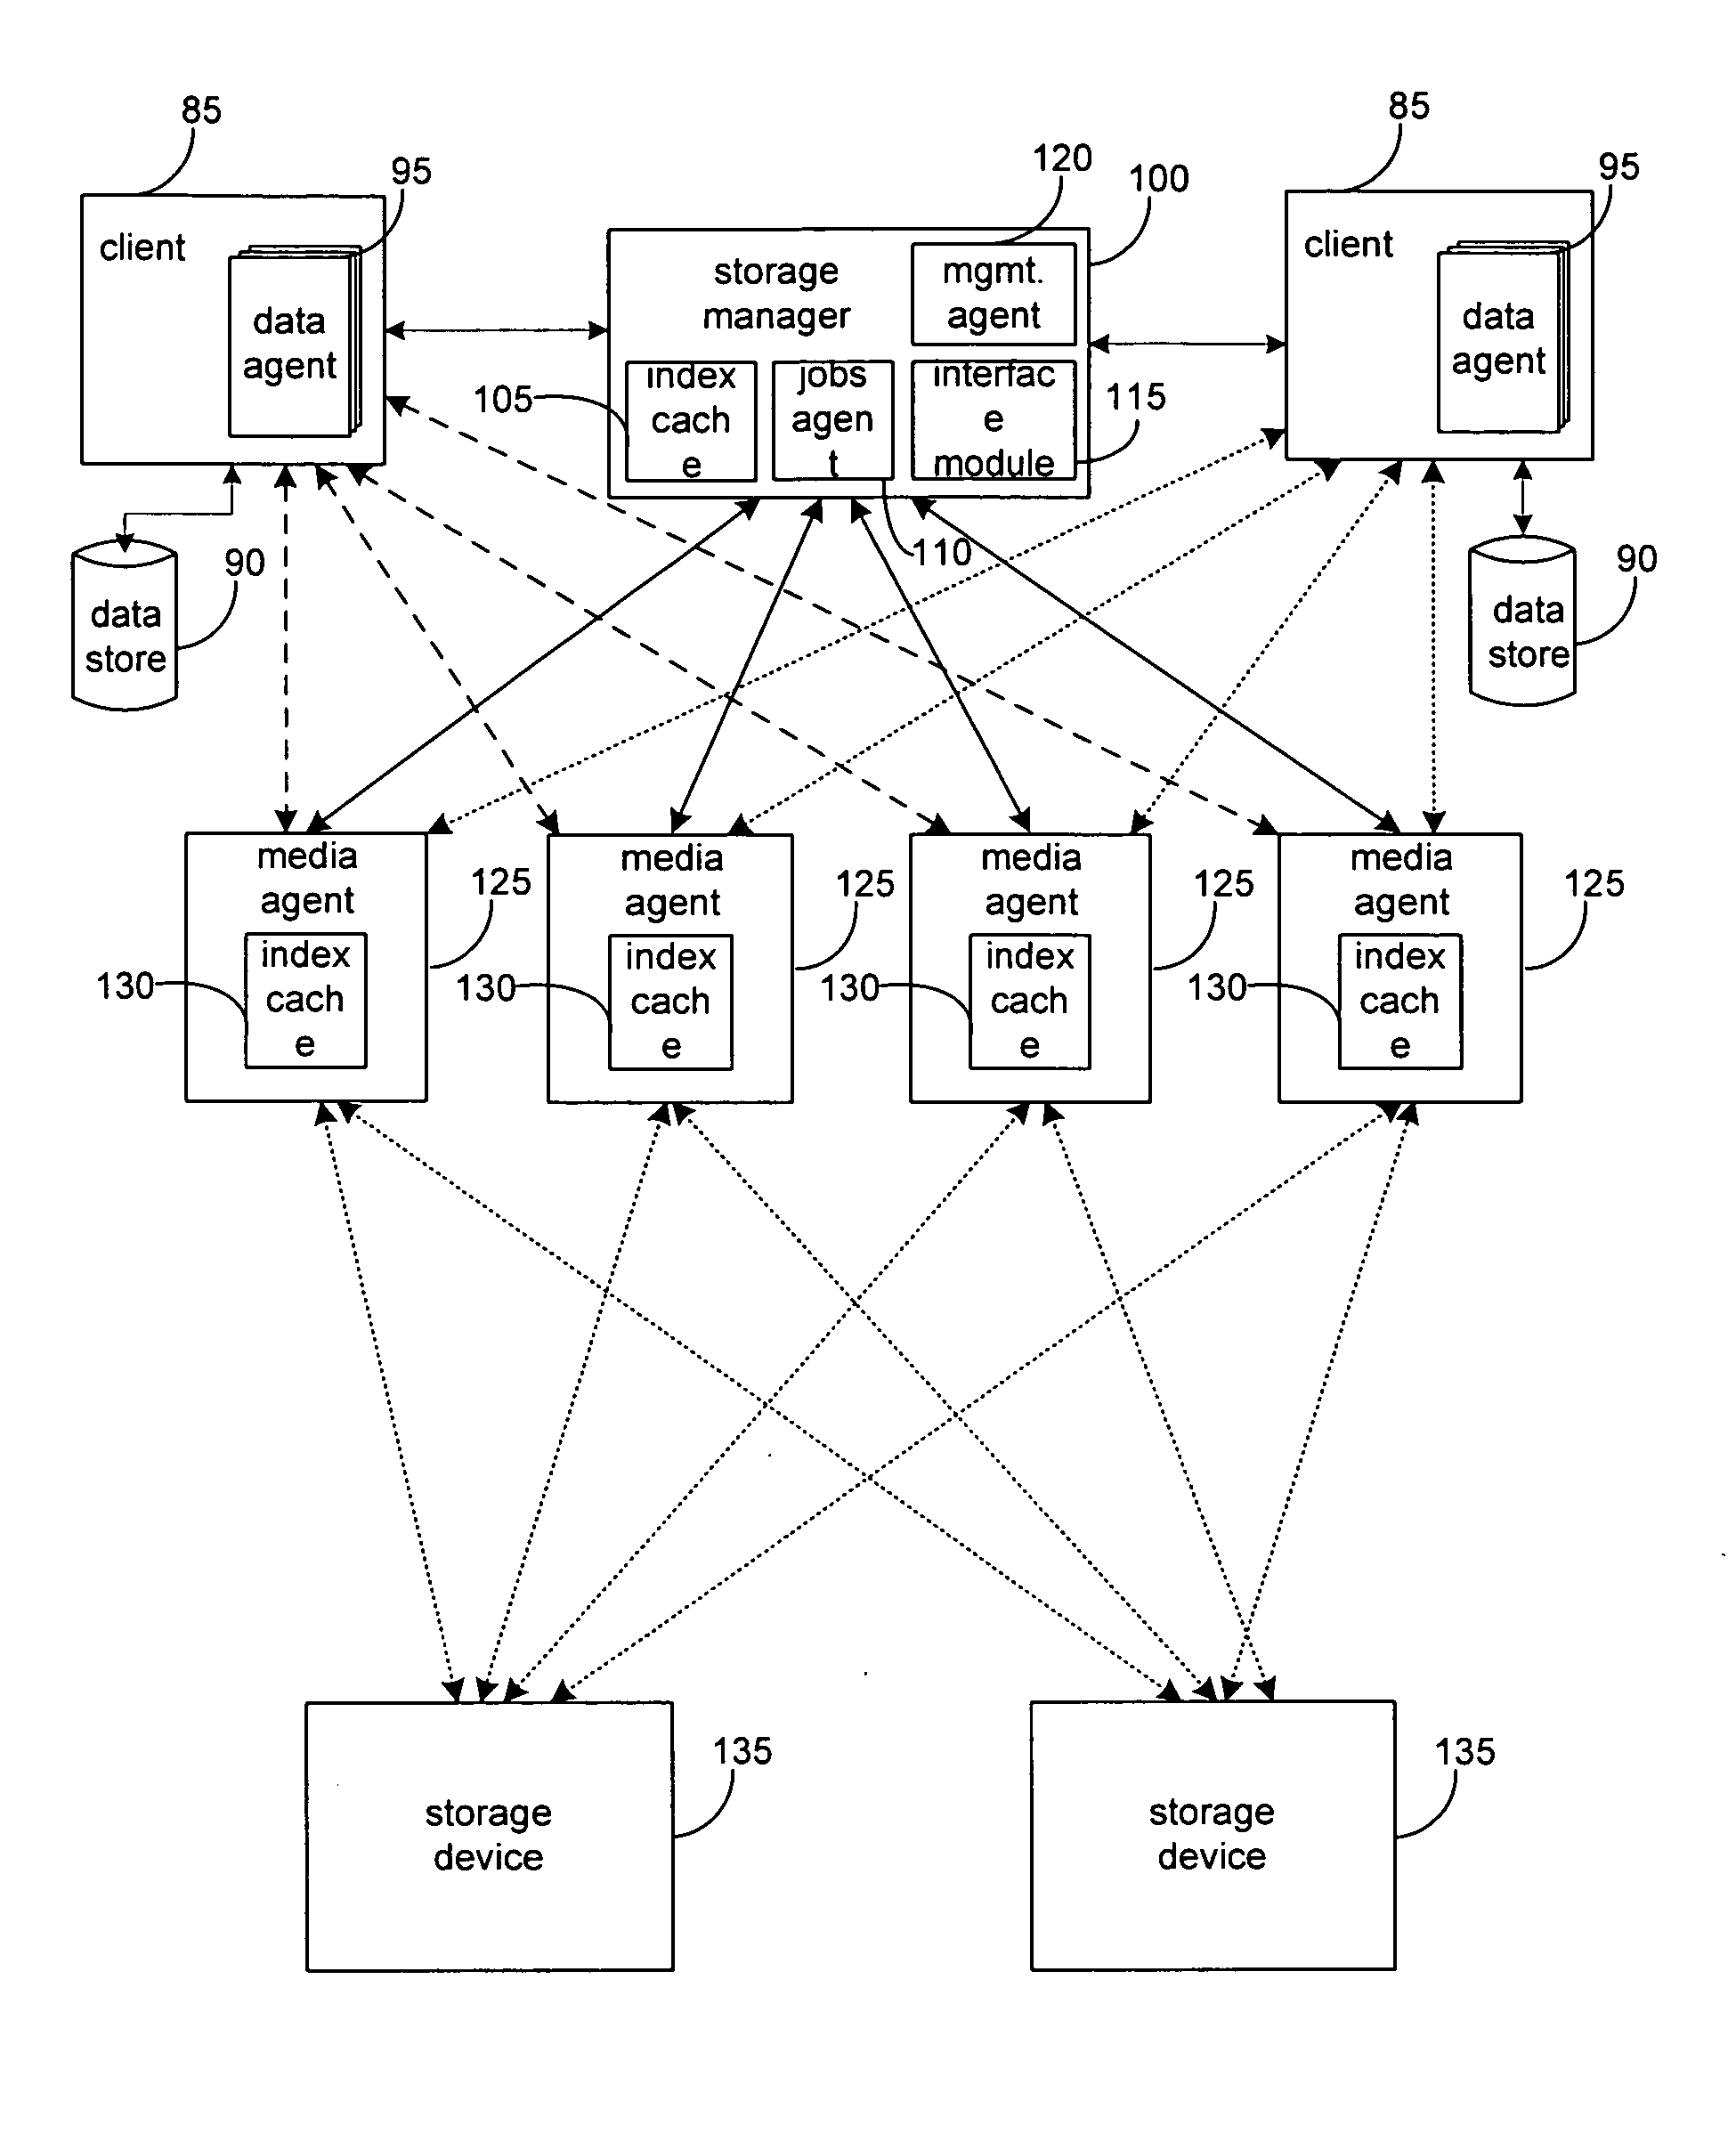 System and method to support single instance storage operations